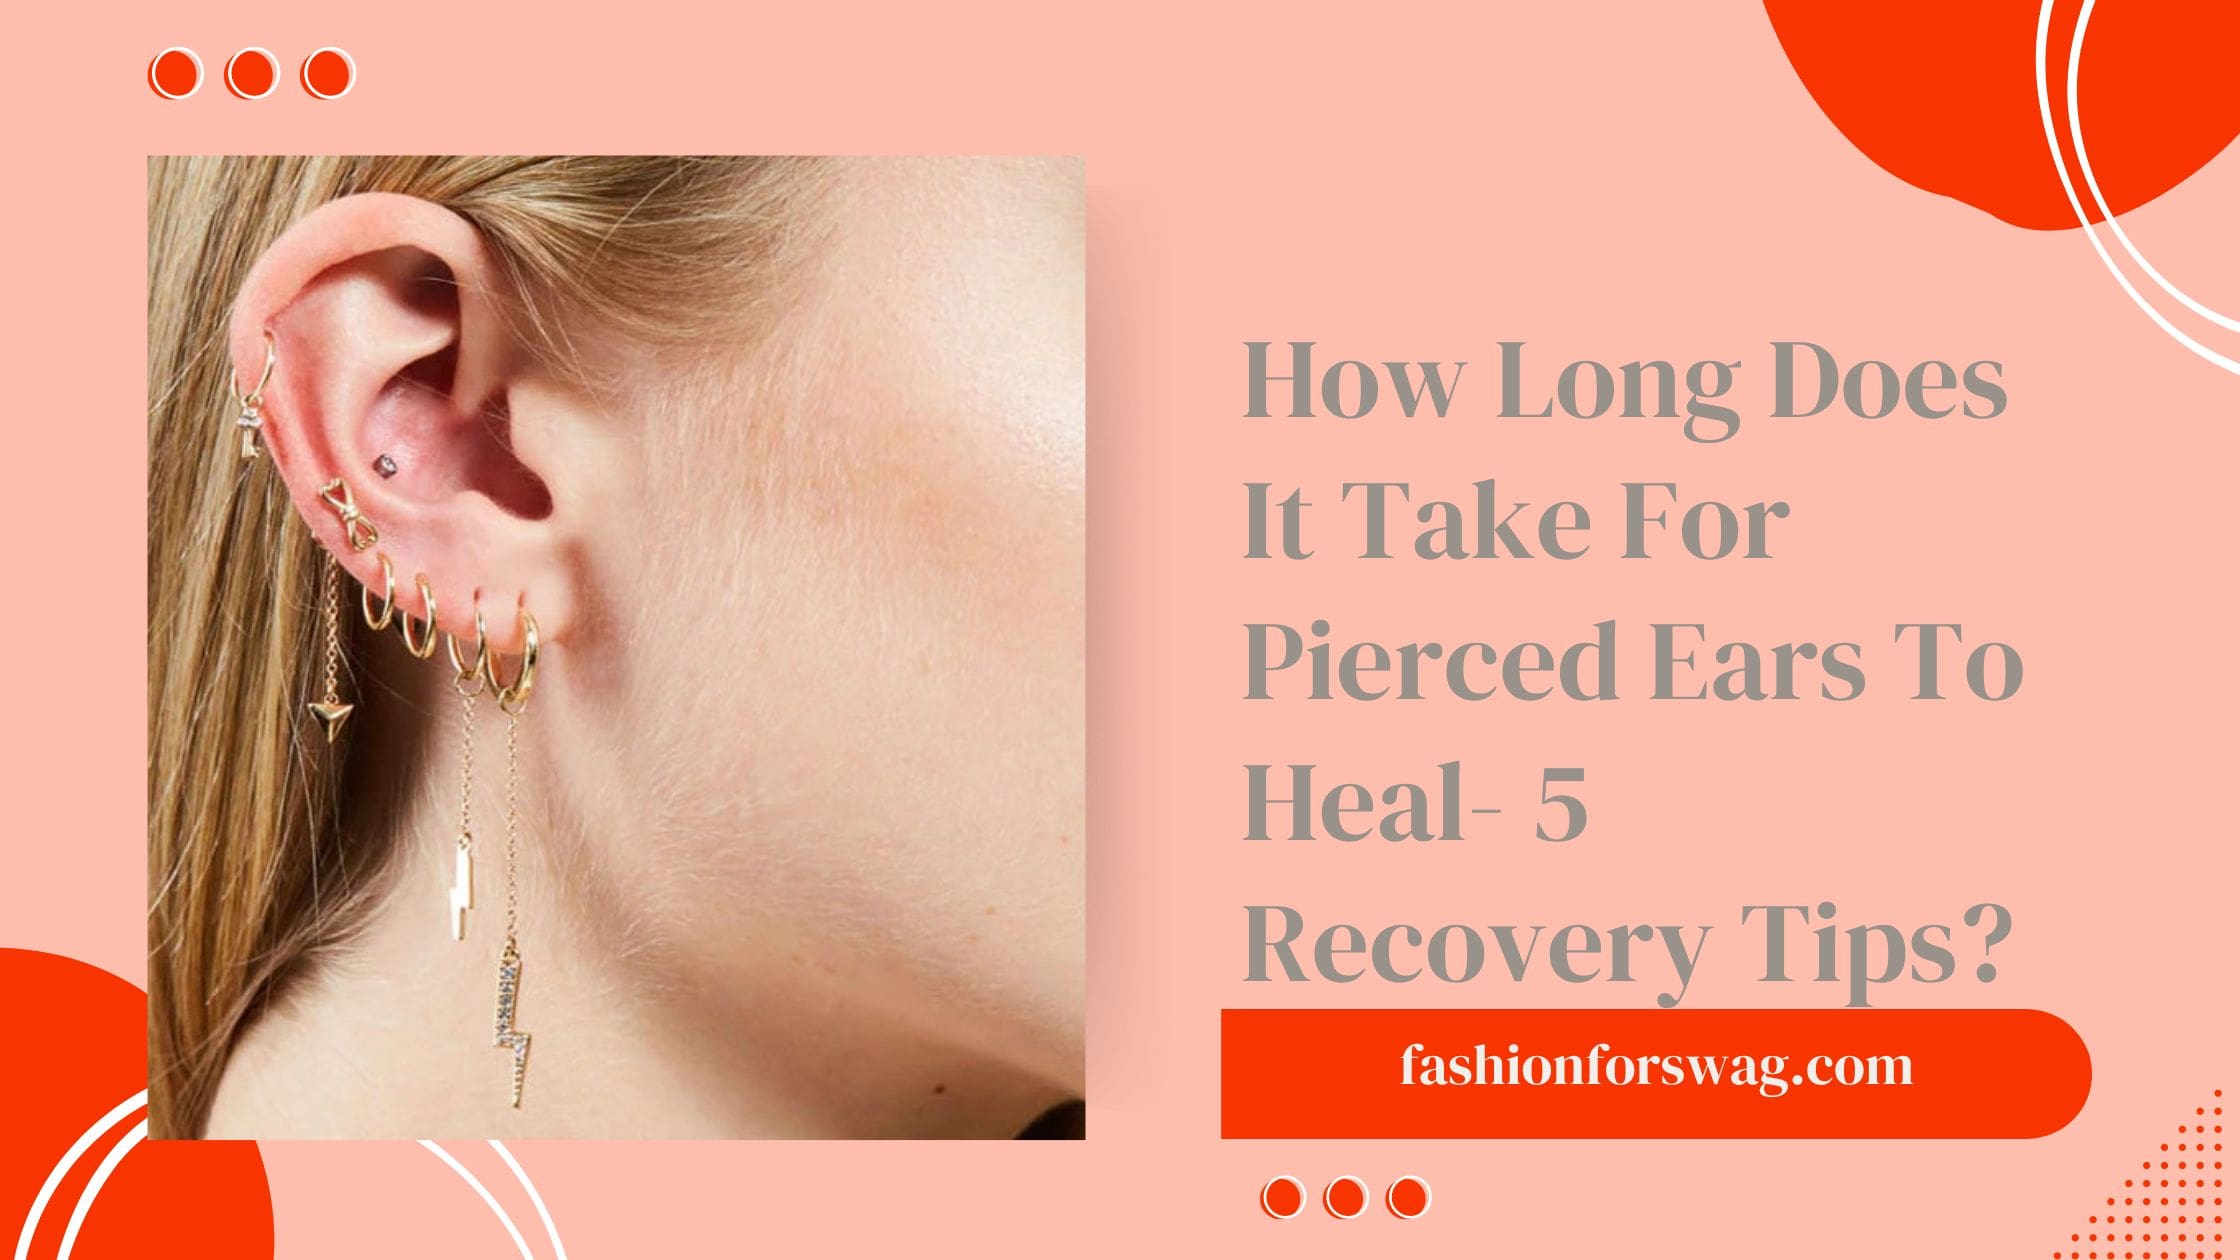 How Long Does It Take For Pierced Ears To Heal- 5 Recovery Tips?